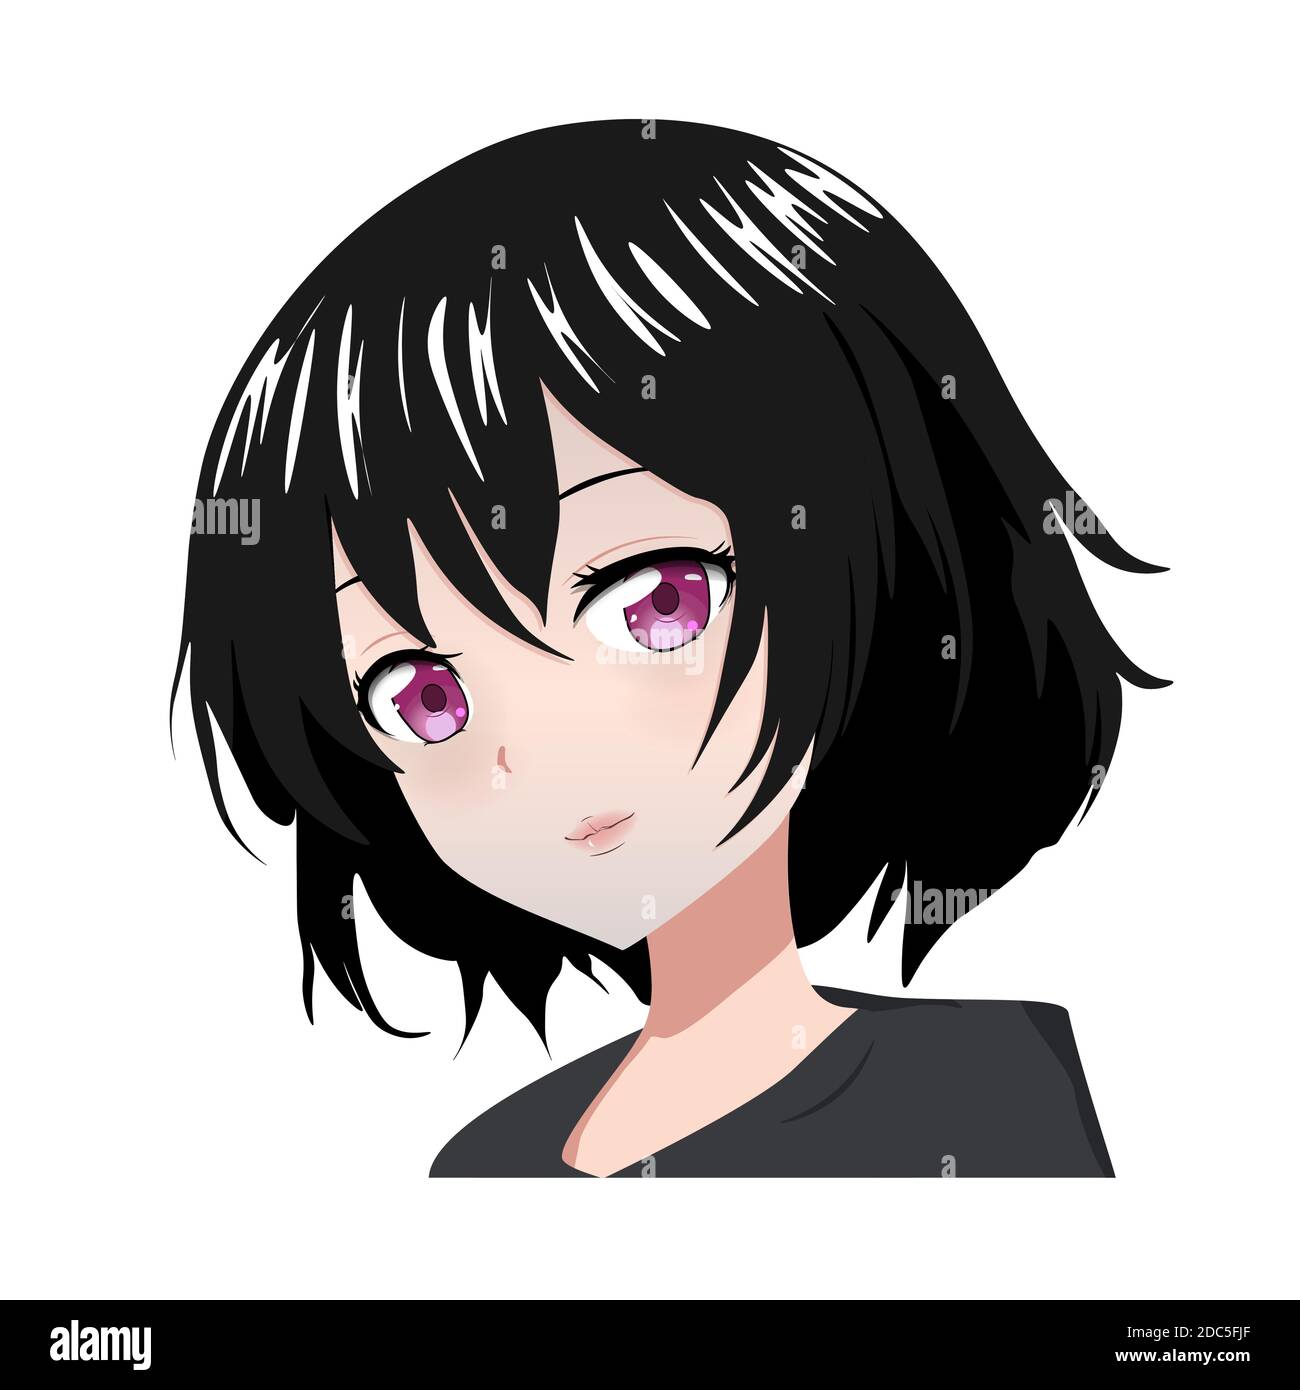 Free anime Vector File  FreeImages